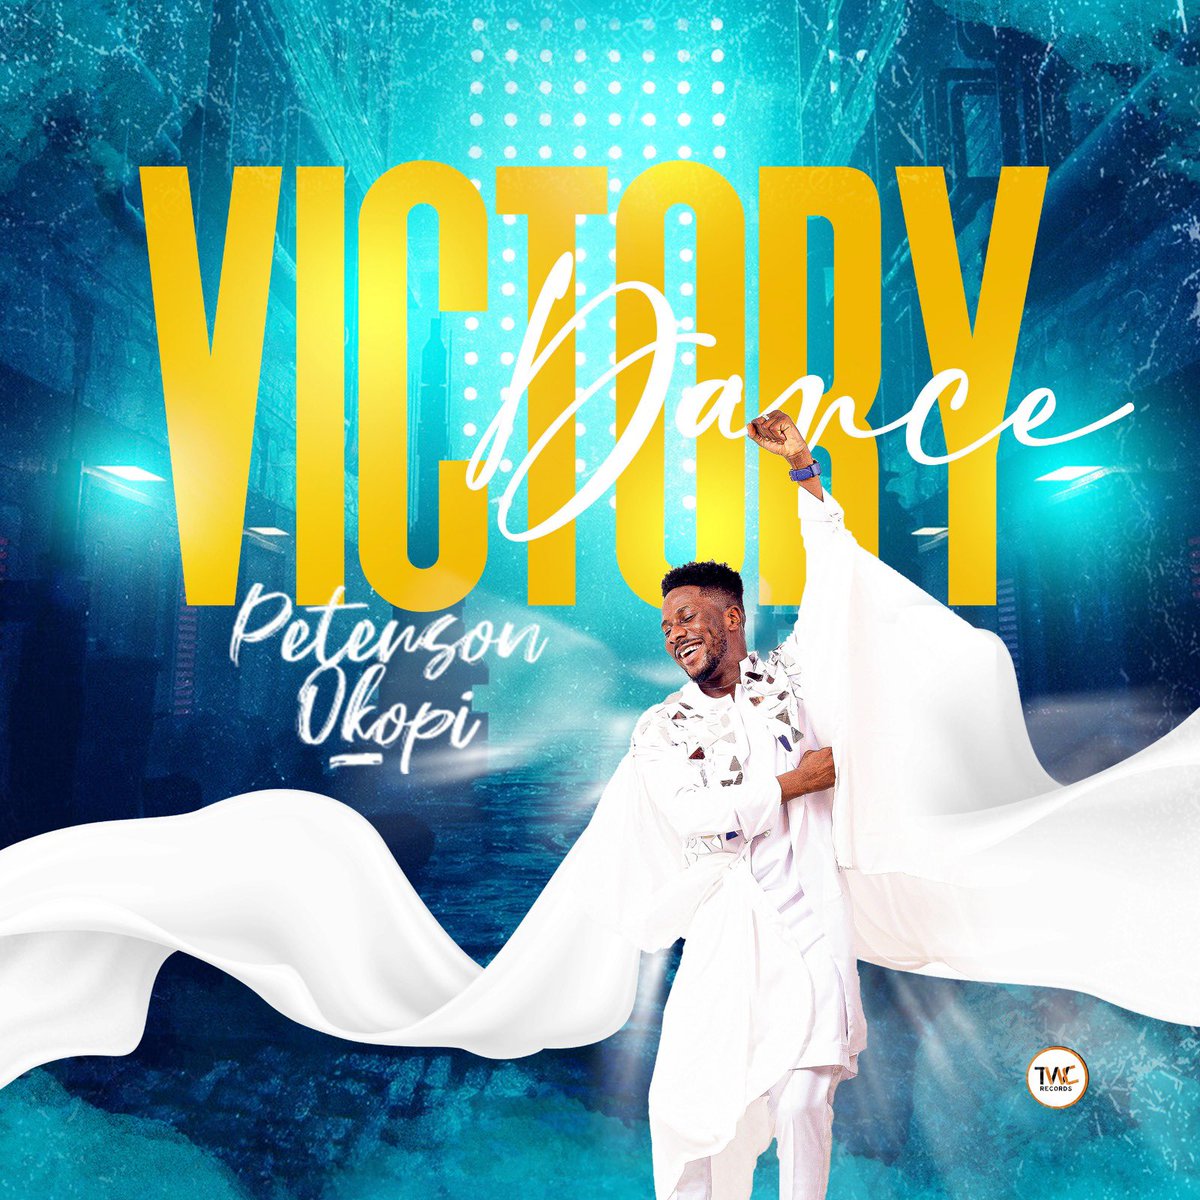 My God is alive!!! My God dey fight na me dey win, minister #PetersonVictoryDance is the real deal. Cc: @Okopi_Peterson